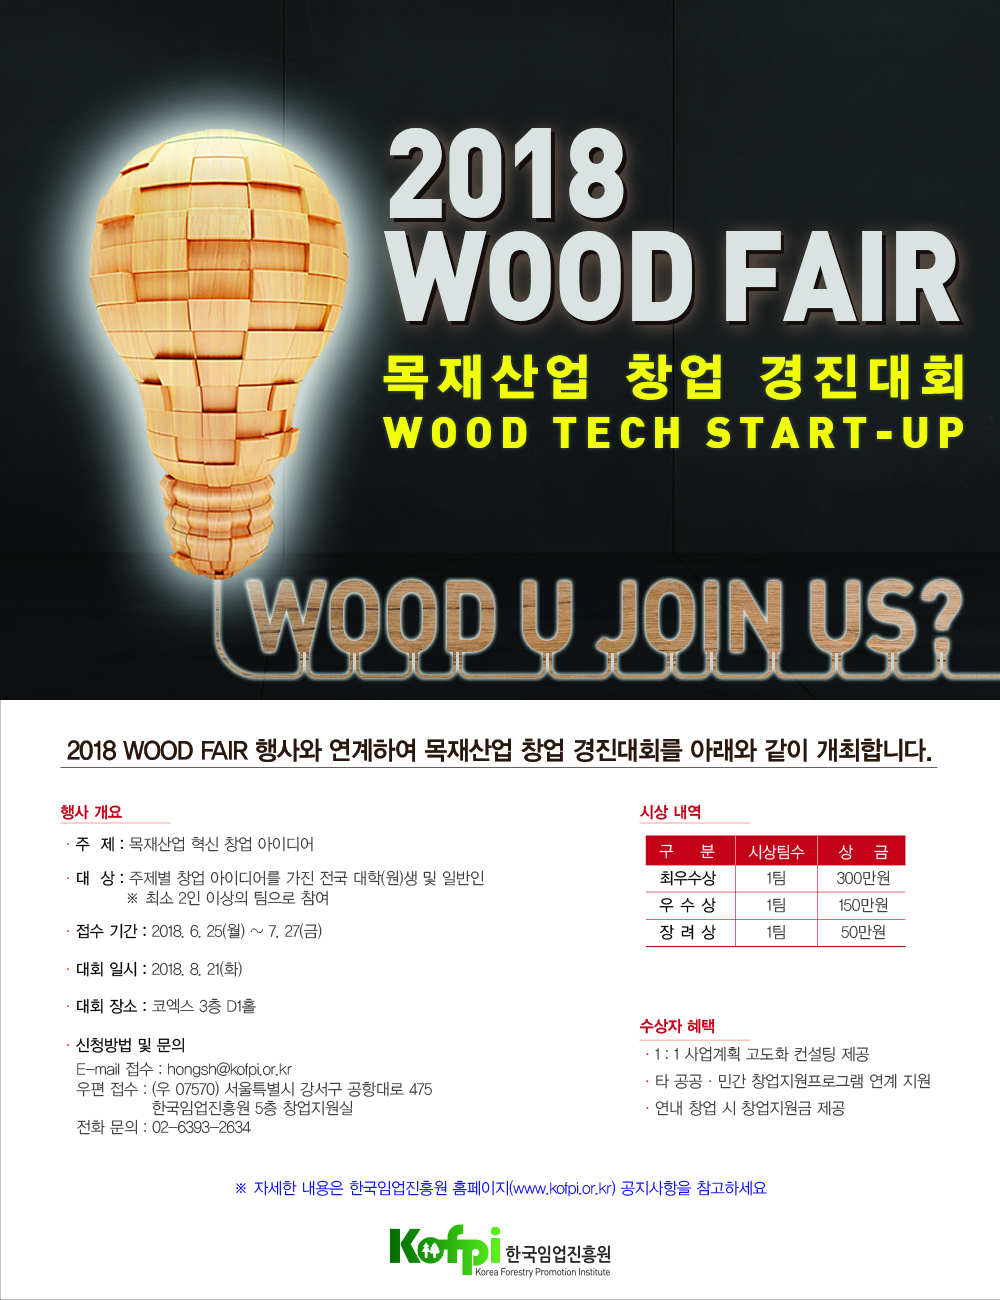 You are currently viewing 2018 WOOD FAIR 목재산업 창업(Wood Tech Start-up) 경진대회 모집 공고